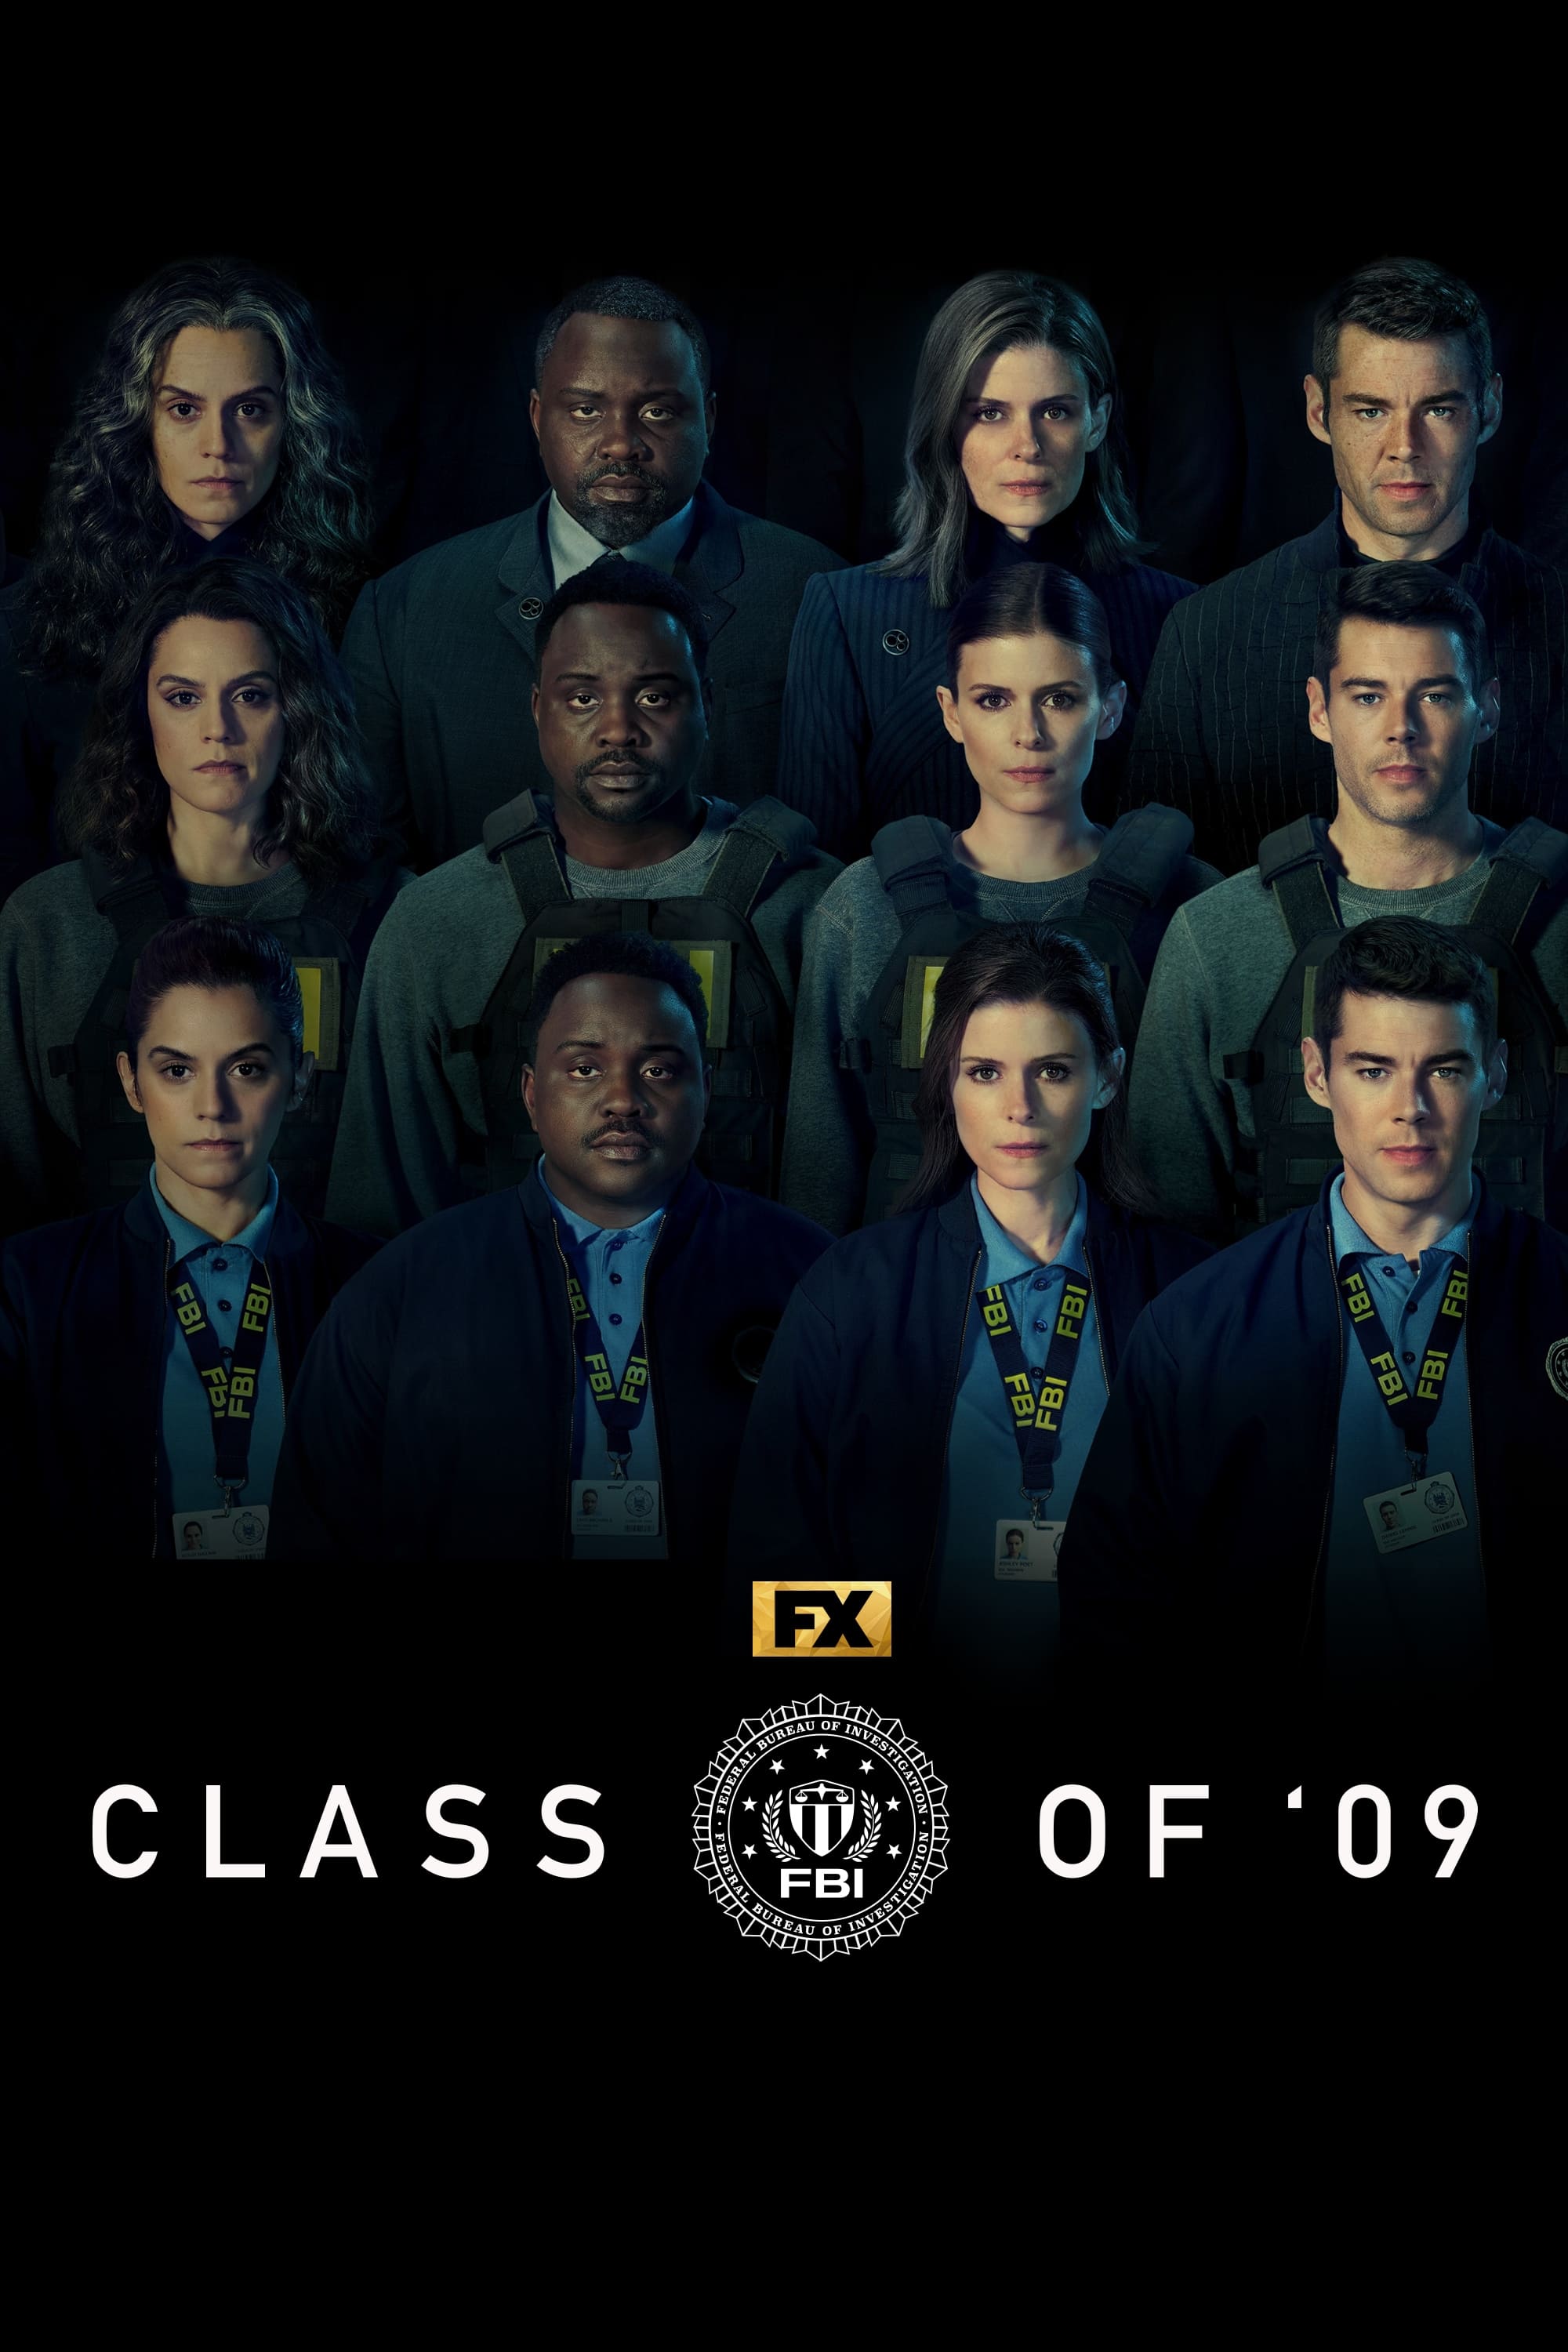 Class of '09 - Série TV 2023 streaming VF gratuit complet